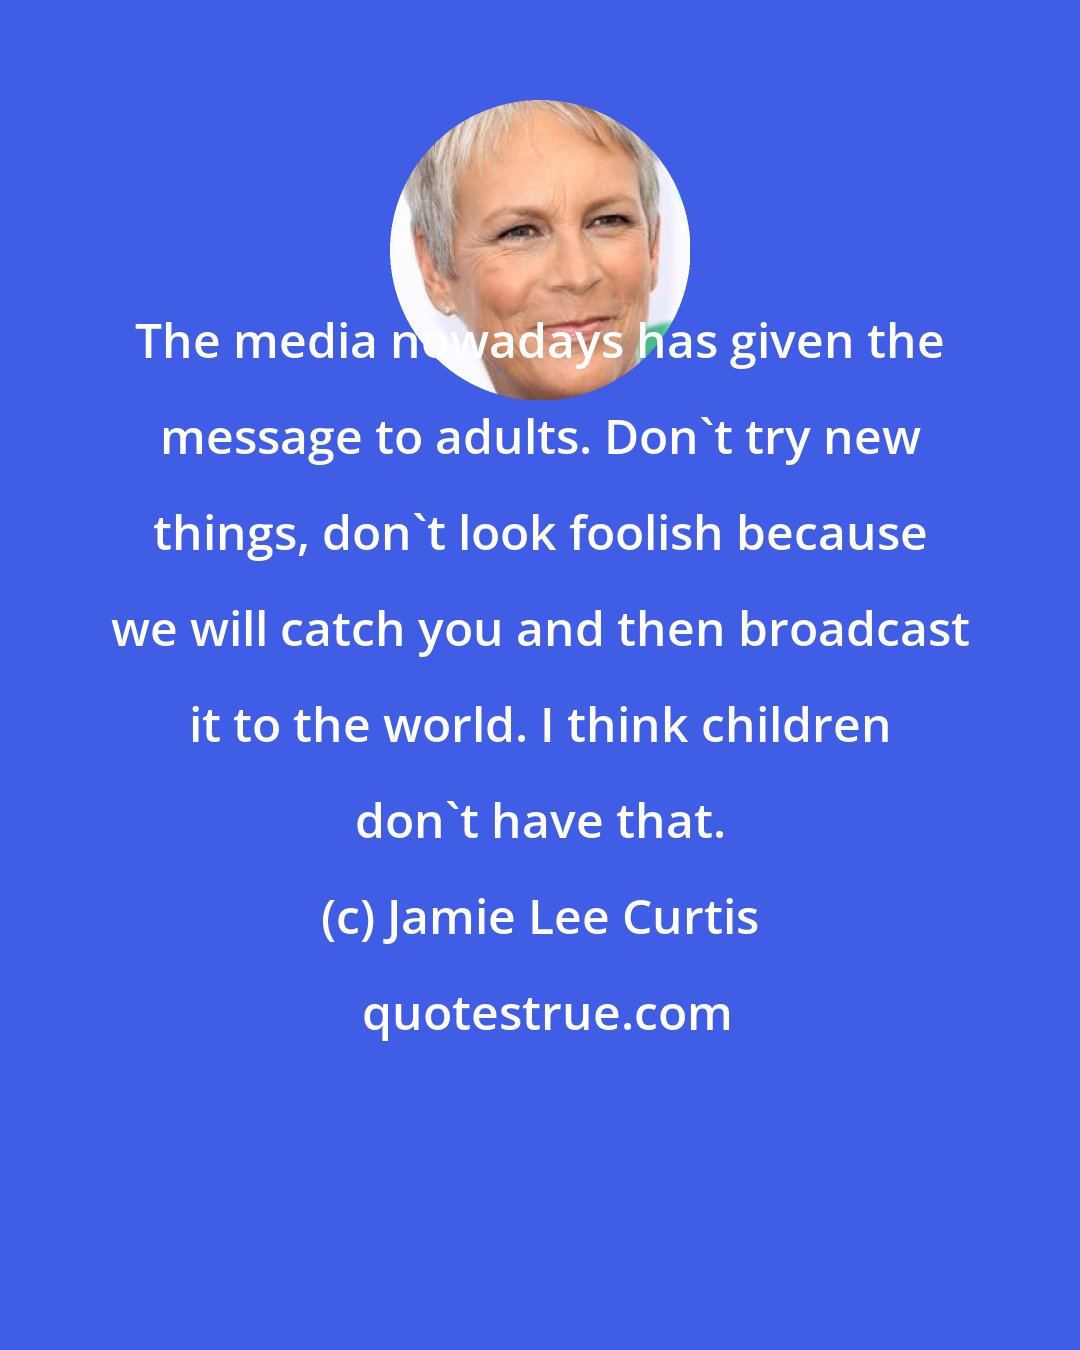 Jamie Lee Curtis: The media nowadays has given the message to adults. Don't try new things, don't look foolish because we will catch you and then broadcast it to the world. I think children don't have that.